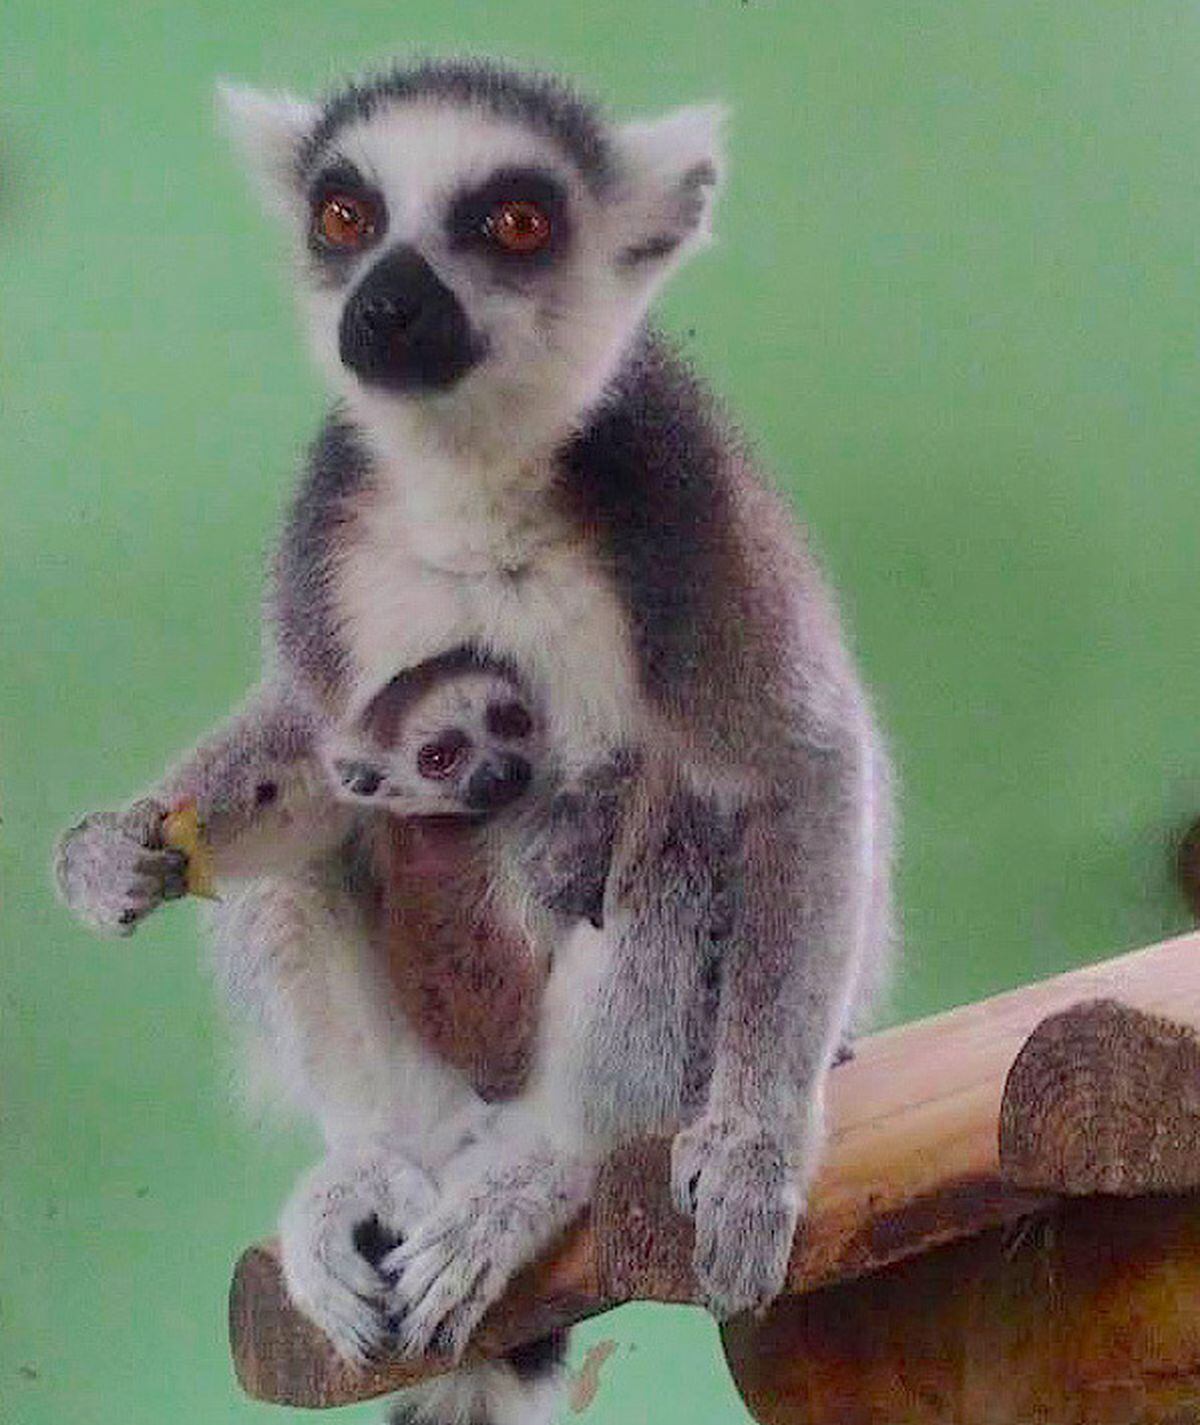 Ring-tailed lemur Phoebe proudly holds her newborn, the latest addition to Lemur Wood at Dudley Zoo (Image by Dudley Zoo)